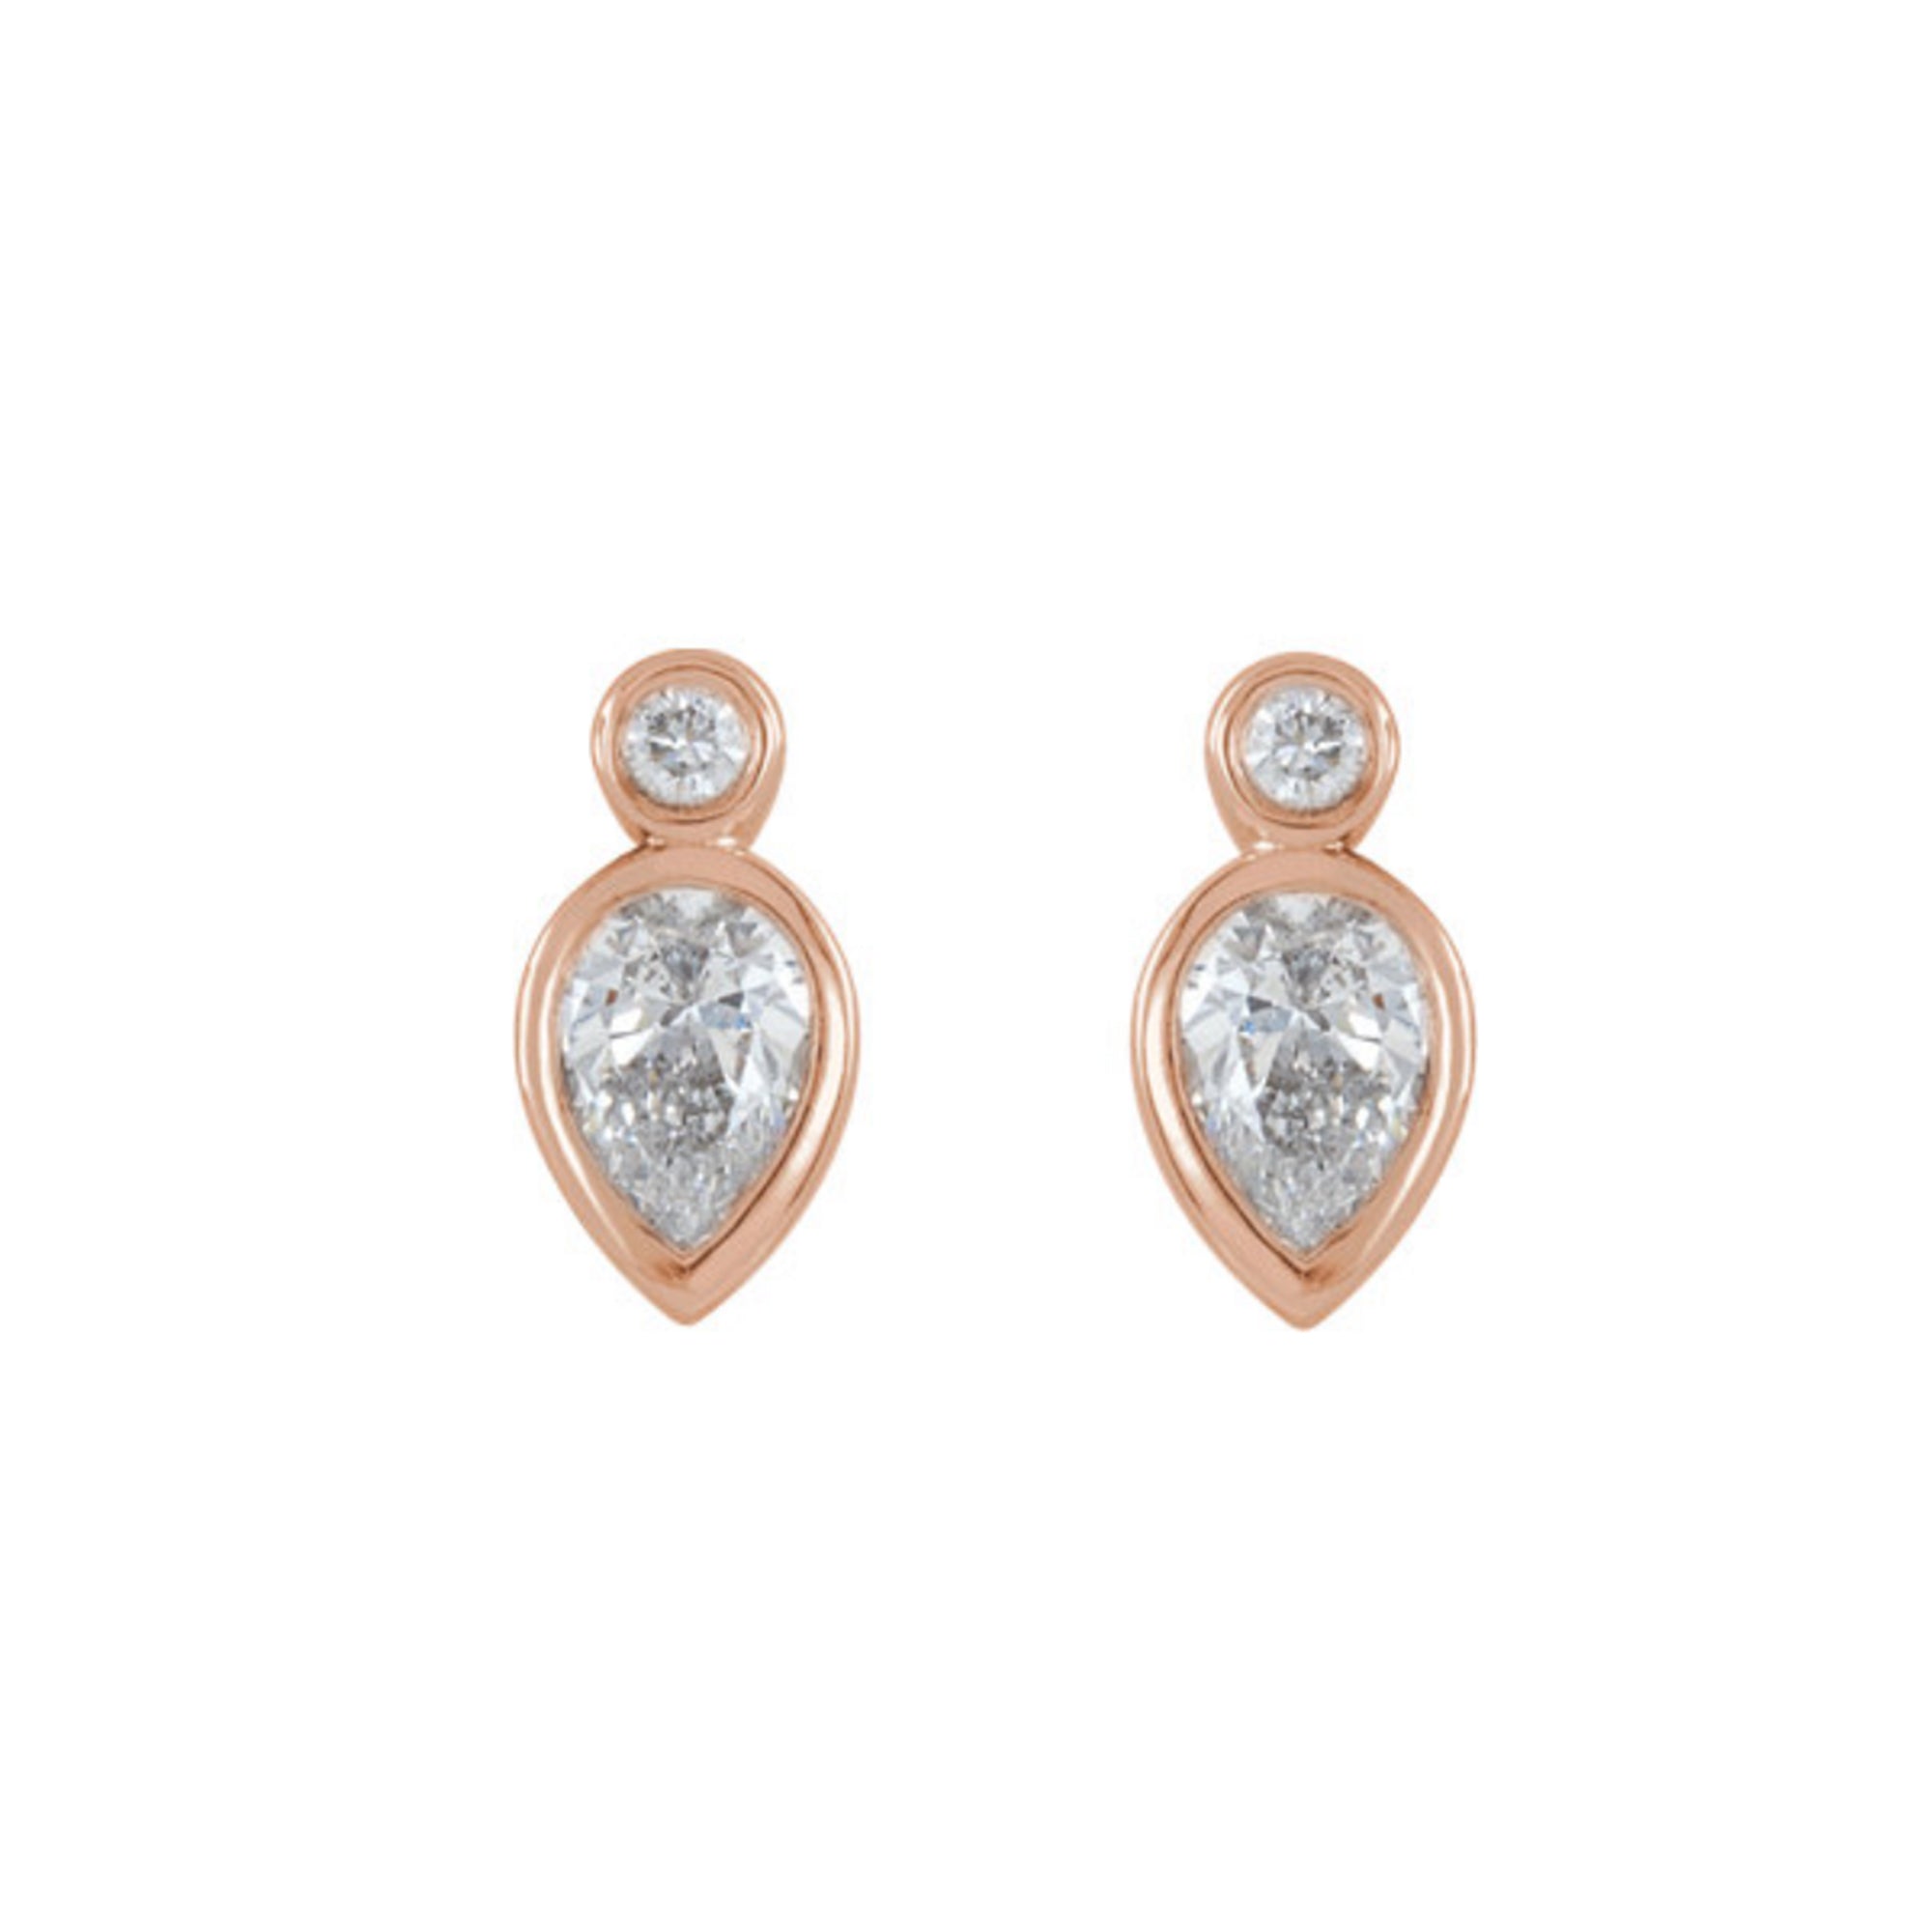 Buy Rose Gold Earrings Designs Online in India  Candere by Kalyan Jewellers